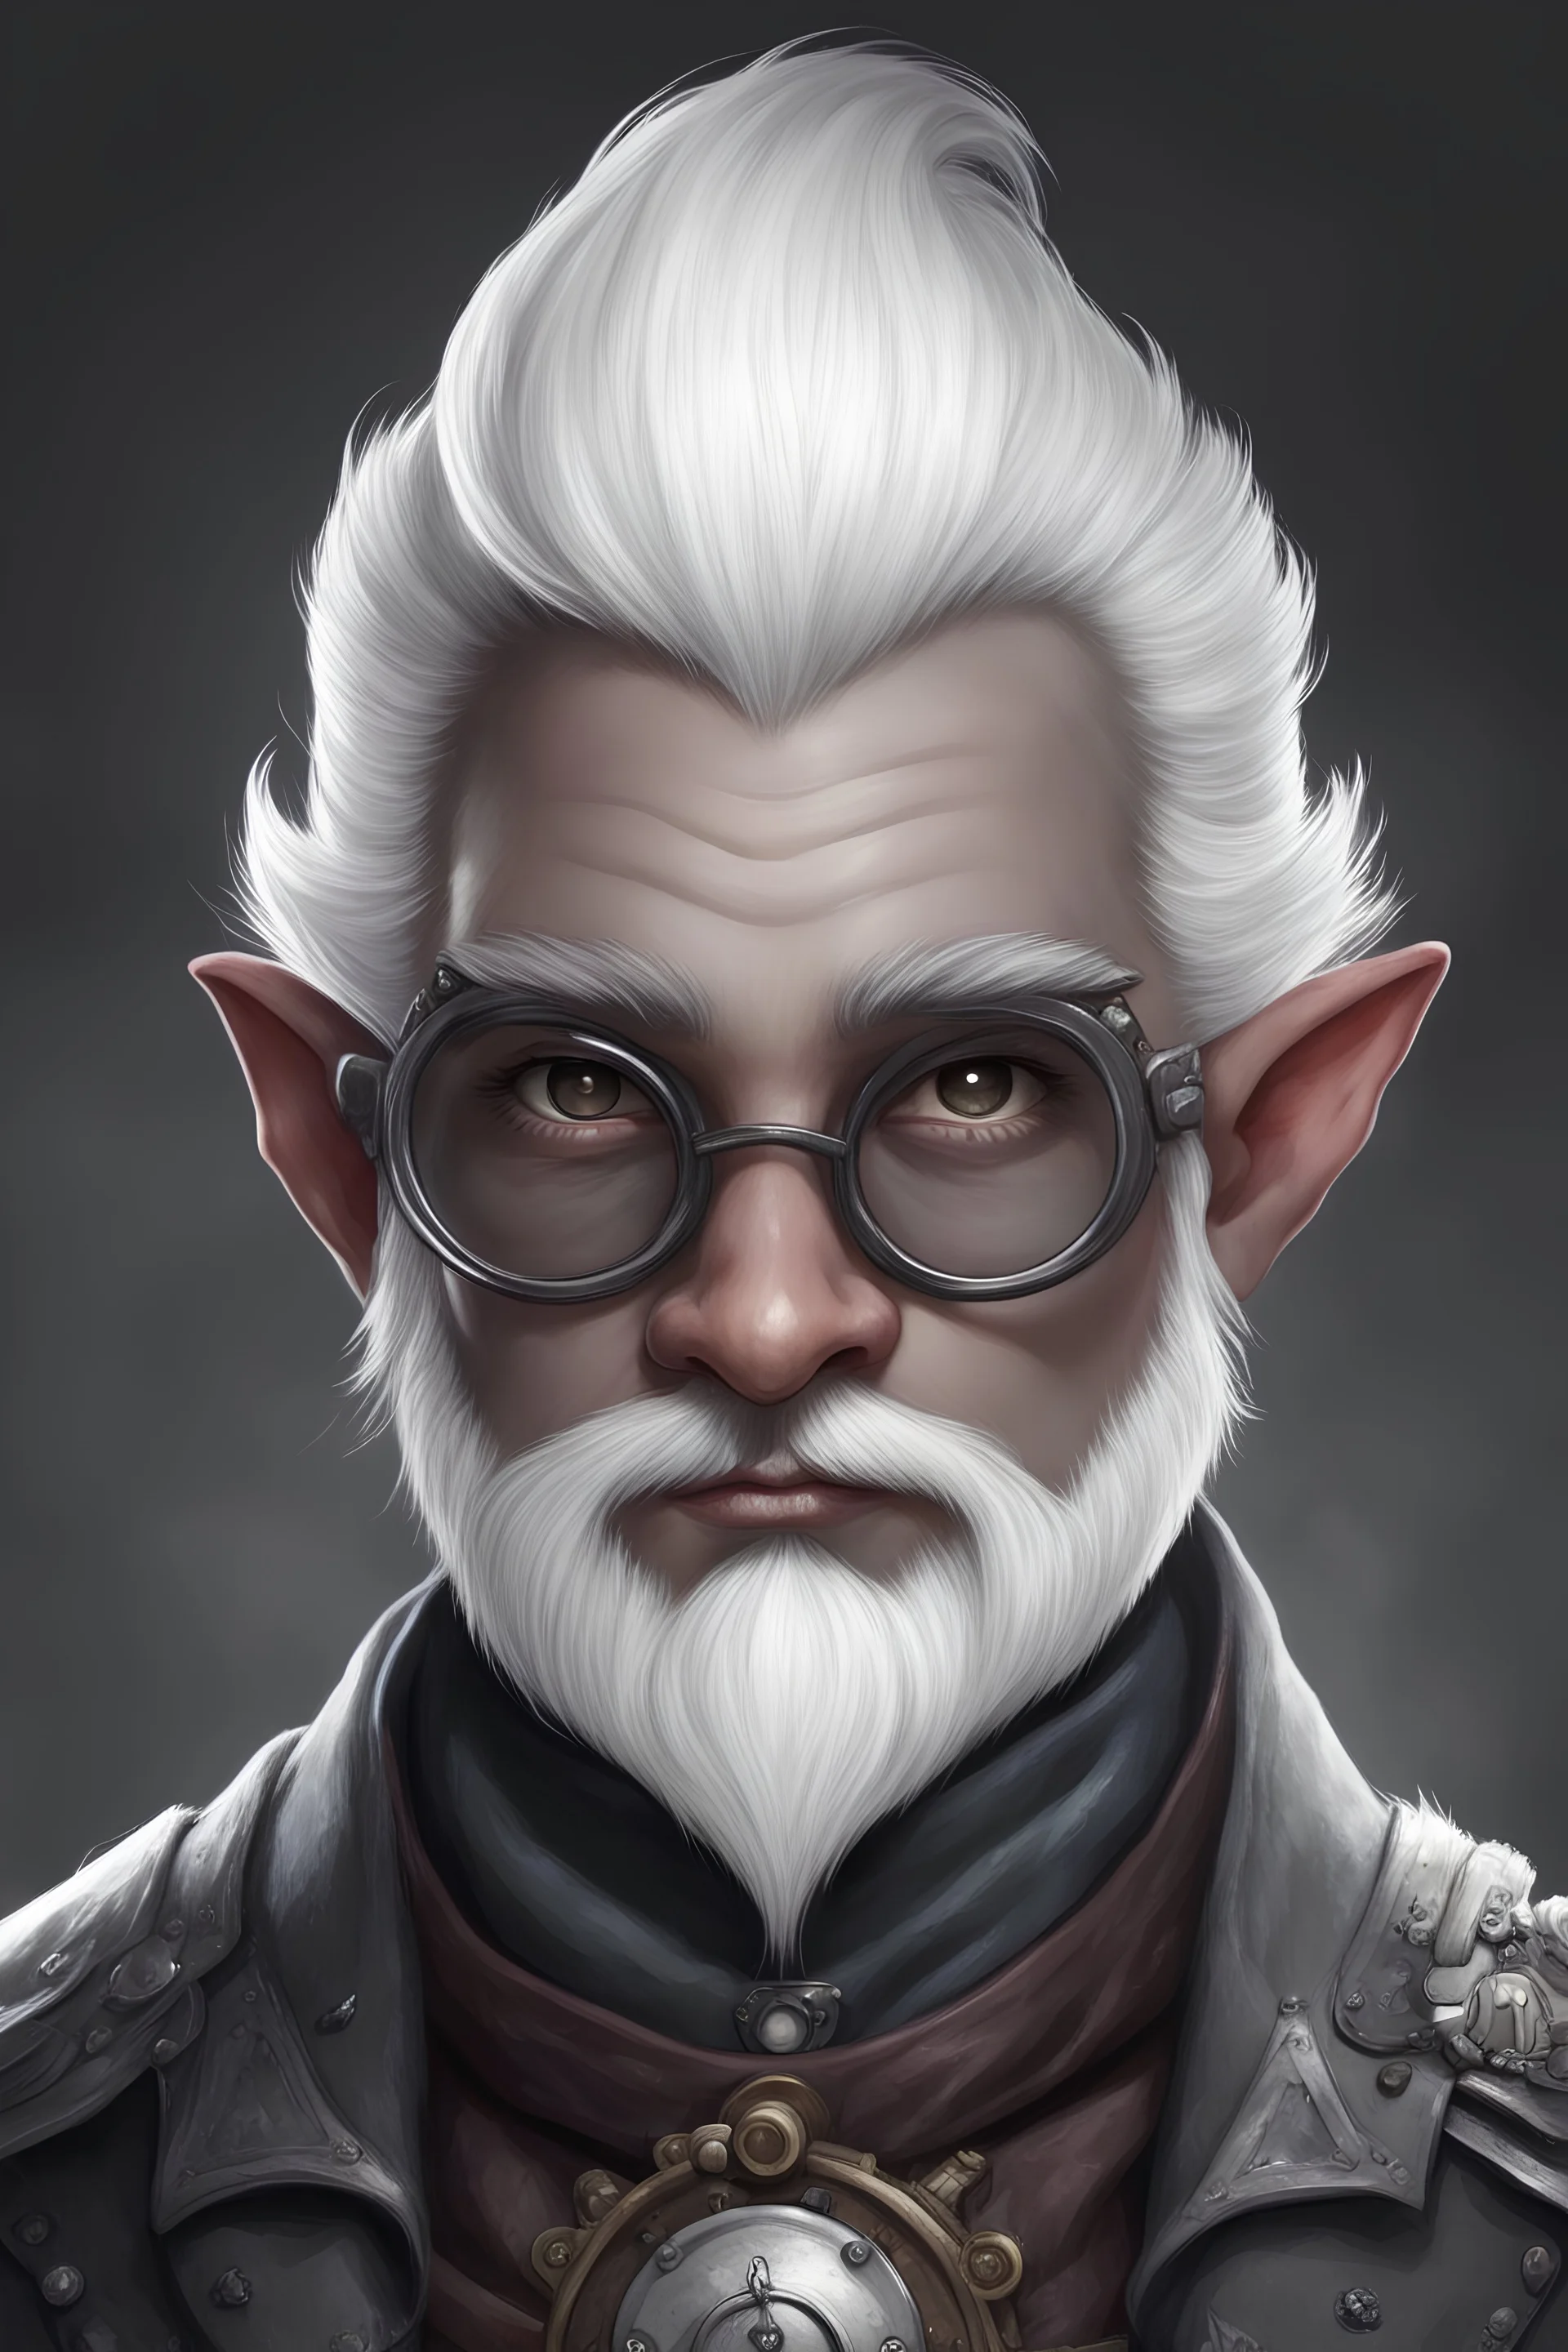 Generate a dungeons and dragons character portrait of the face of a male artificer handsome deep gnome with white eyebrows like snow. He has really dark gray skin like a drow. He has white hair, eyebrows and moustache. He has steampunk style dark glasses. He's 19 years old. His skin is graphite color.